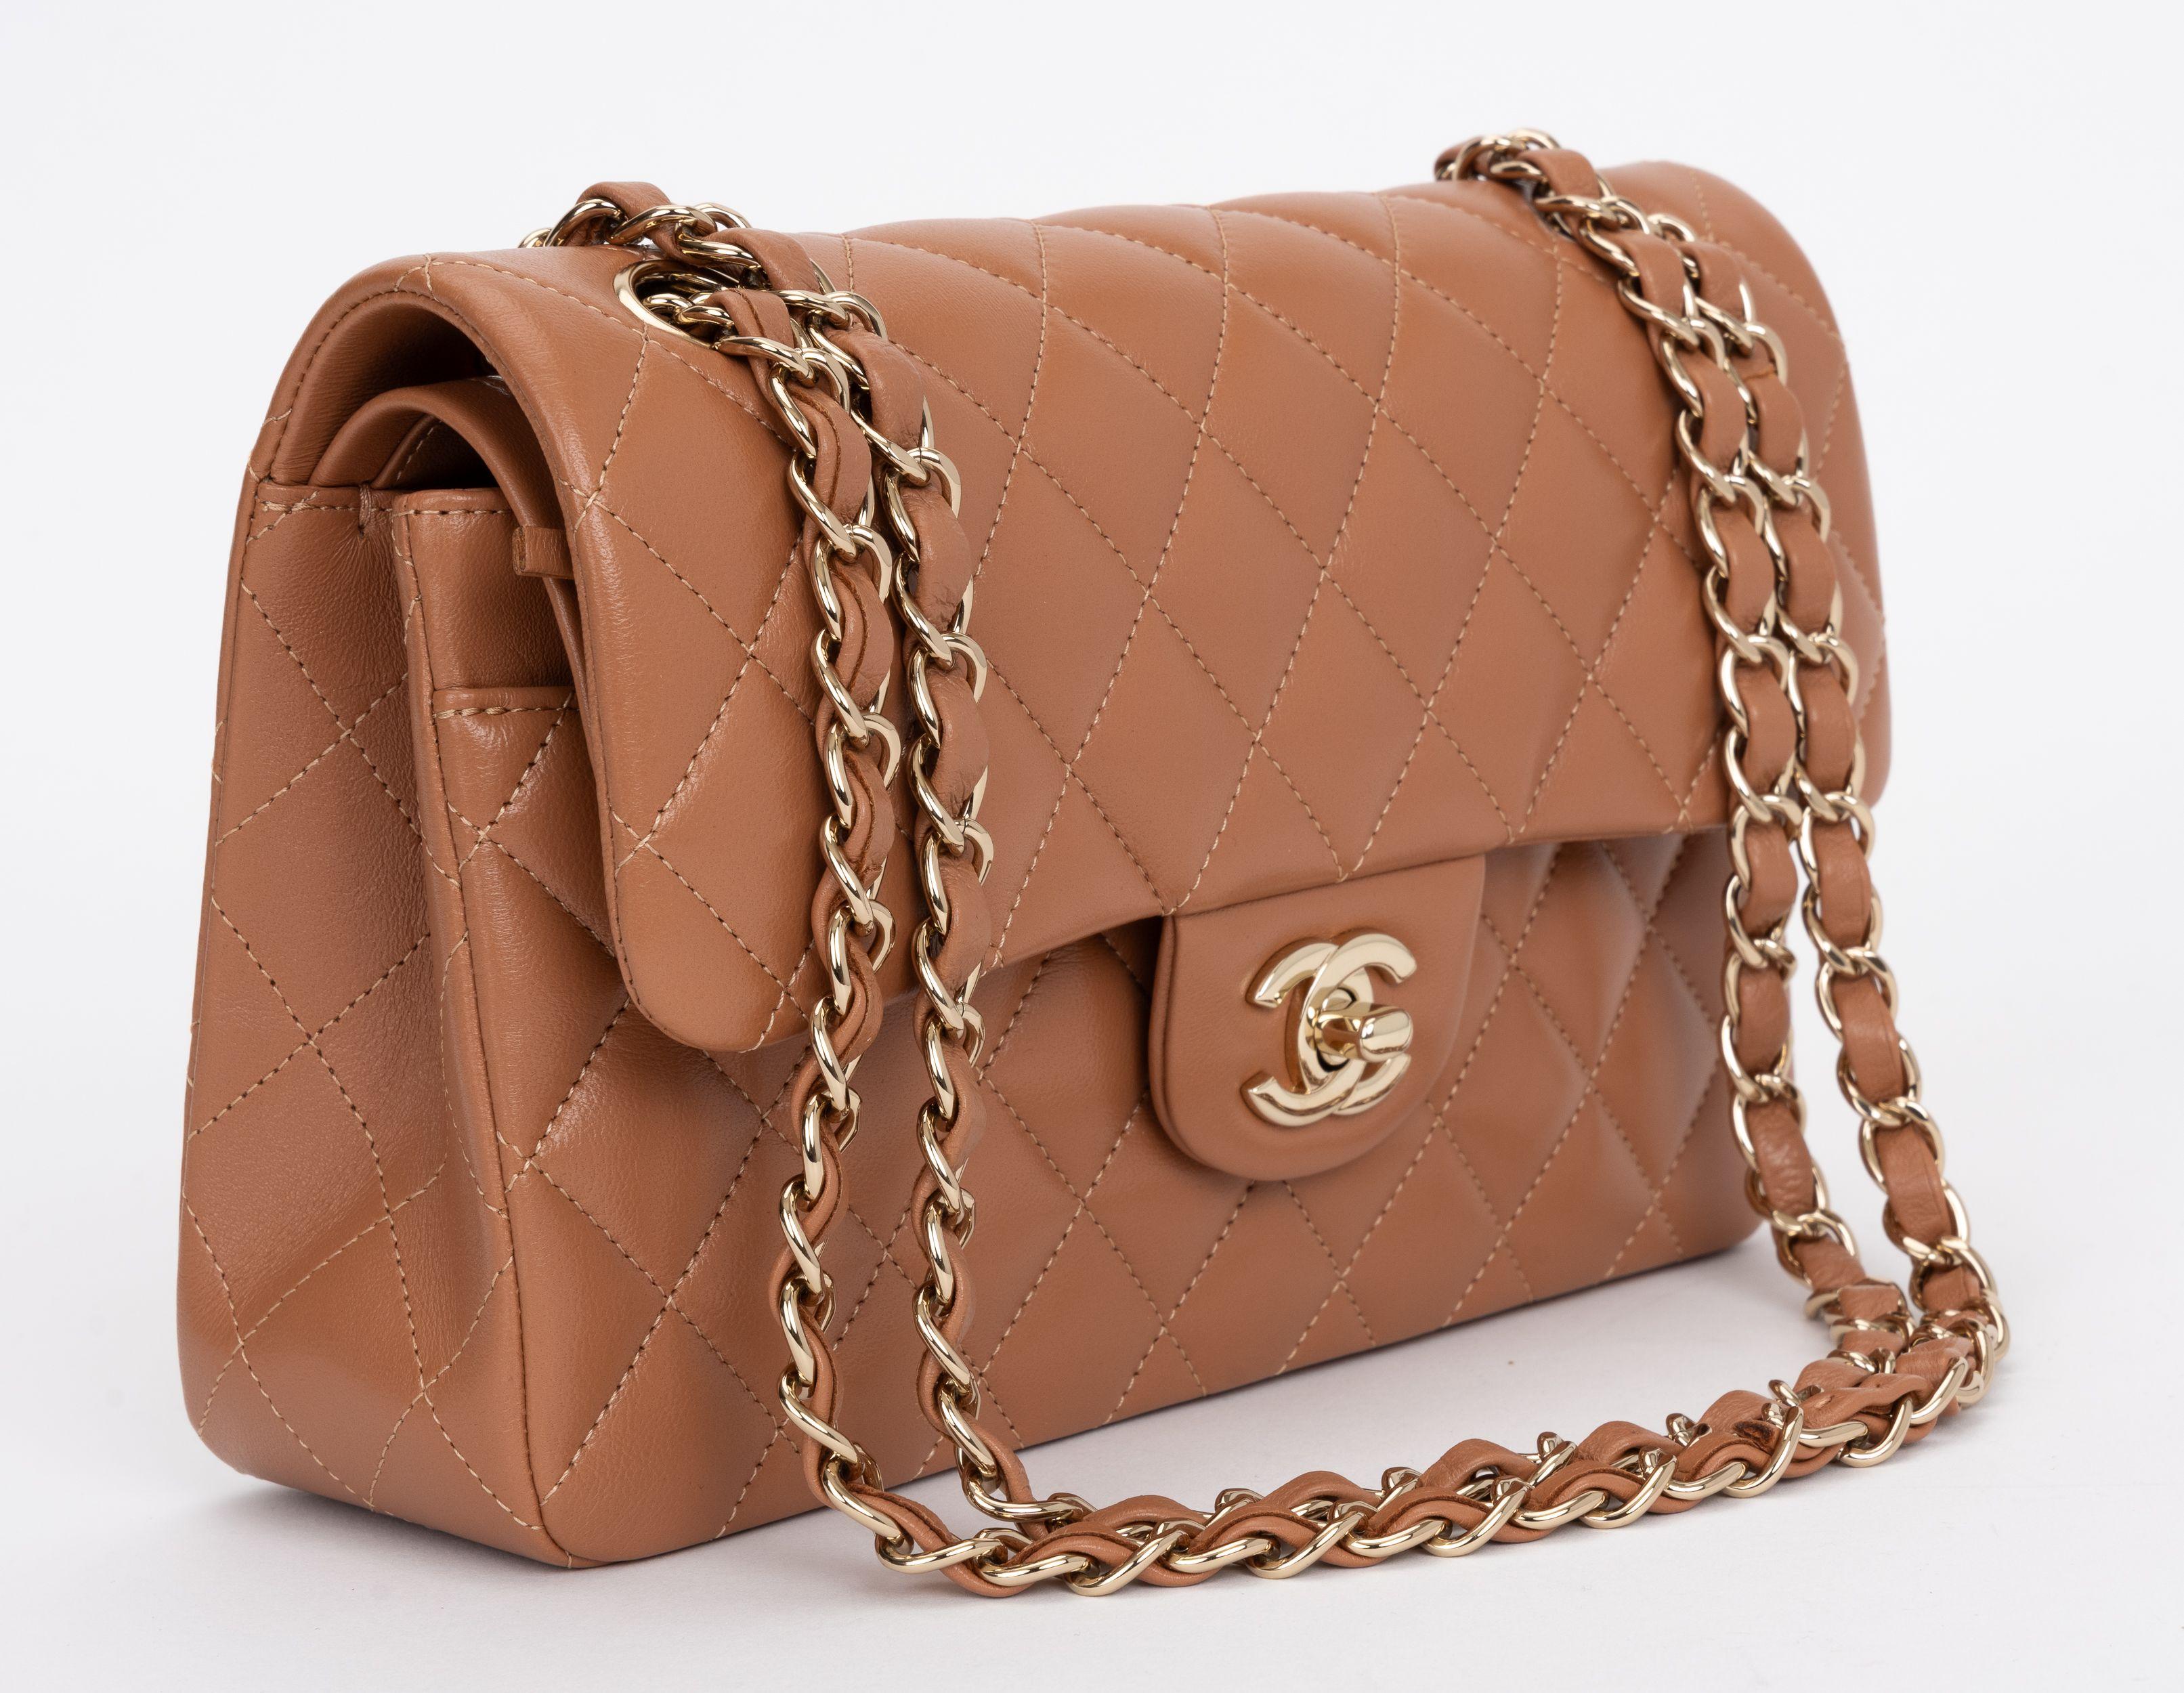 The Chanel Classic Double Flap in Caramel Lambskin with Gold Hardware features a CC Turlock closure, exterior back pocket and adjustable interwoven gold chain link strap. One zipper pocket in the interior. Two interior open pockets. Shoulder drop